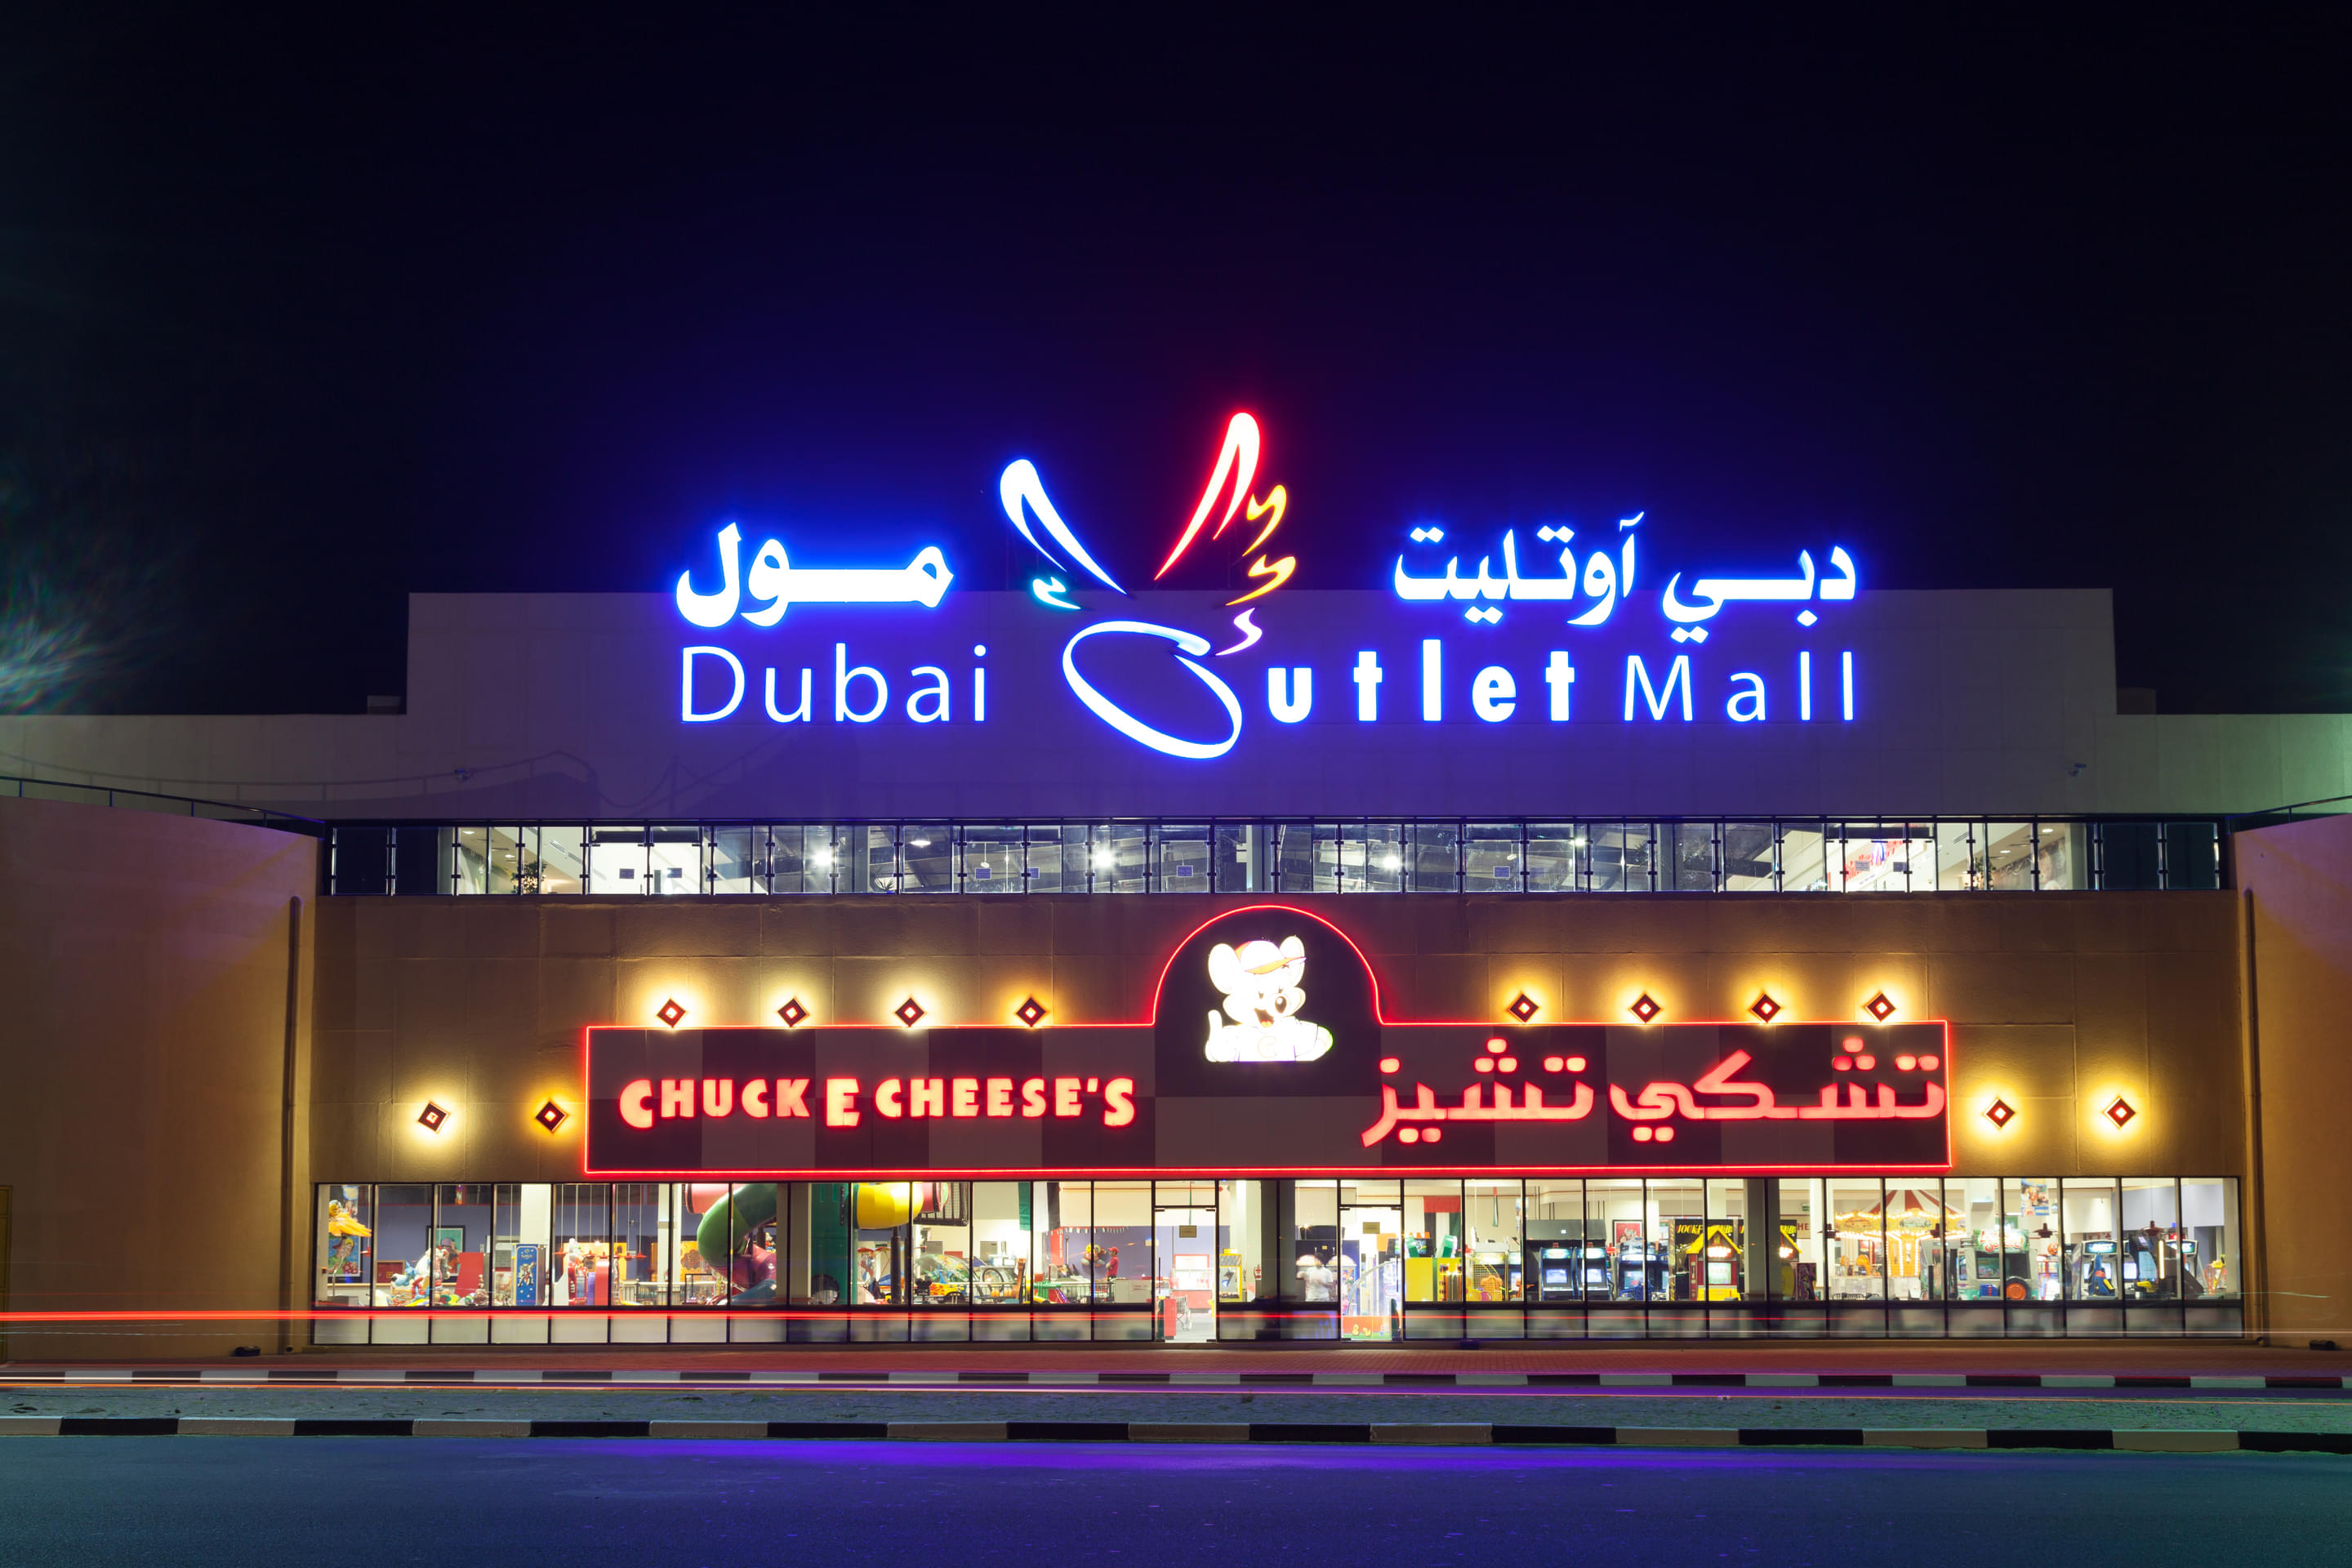 Dubai Outlet Mall Overview